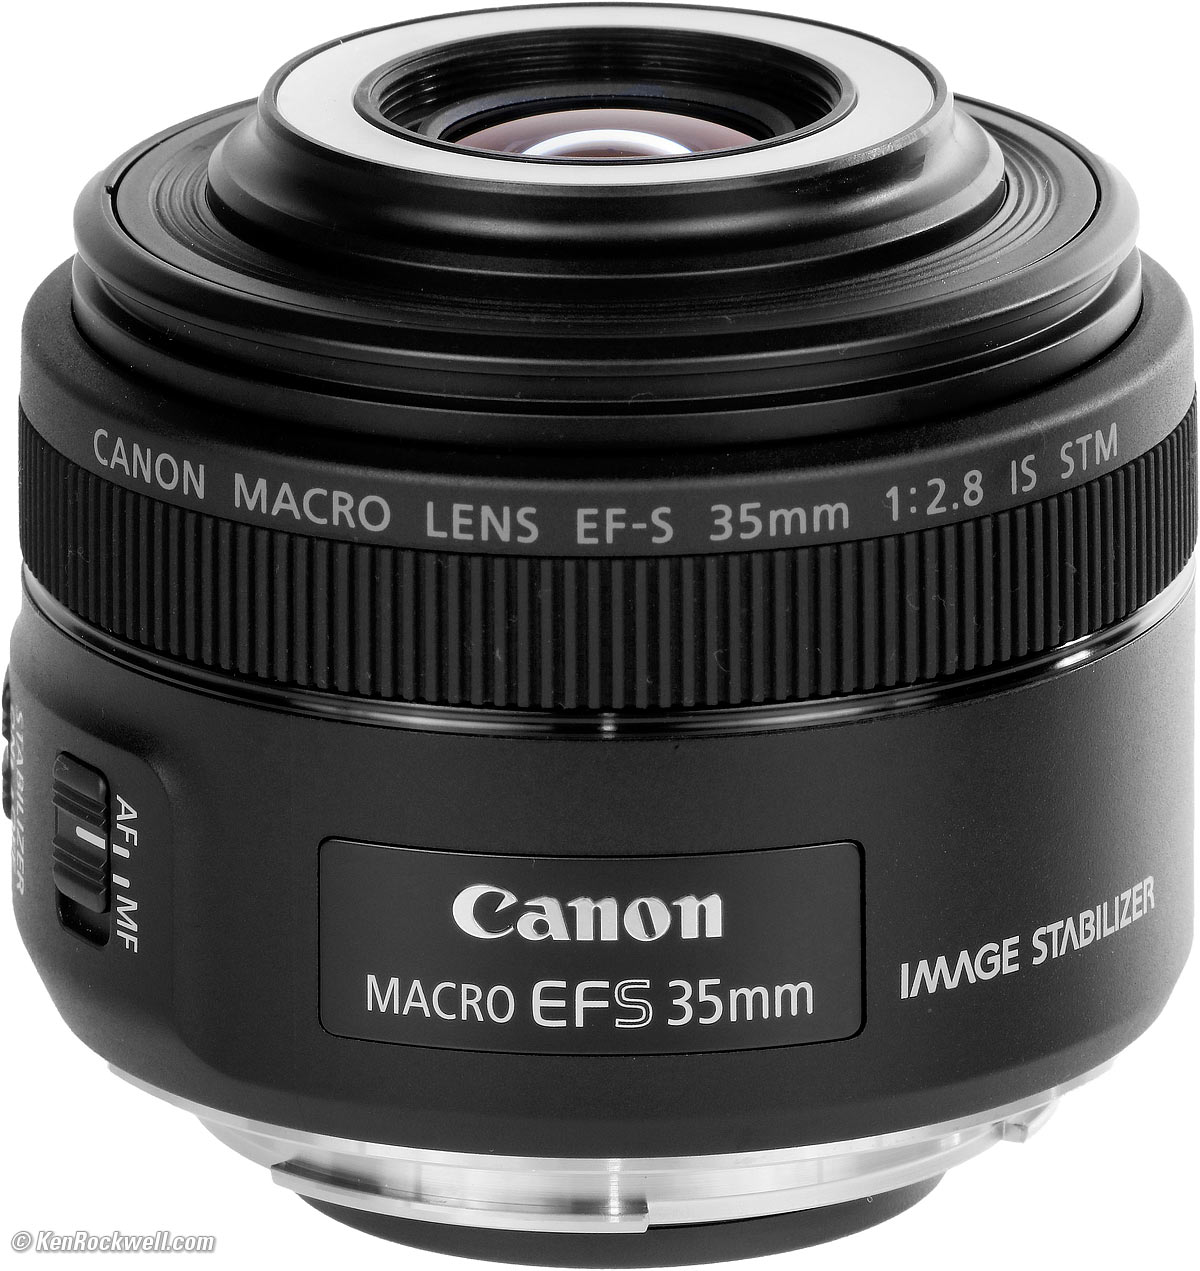 Canon 35mm f/2.8 Macro Review